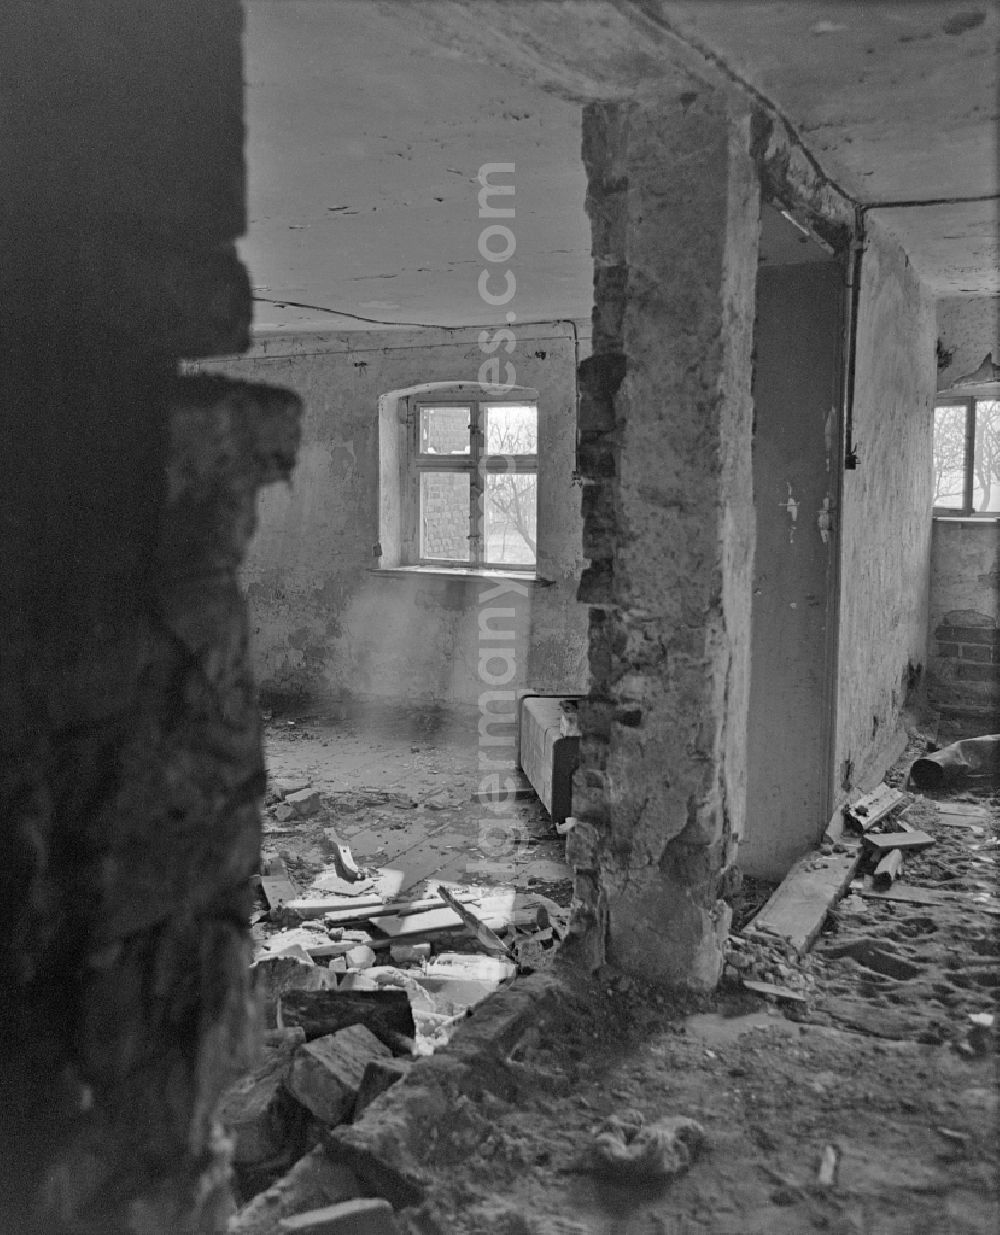 GDR image archive: Tschelln - Demolition work on cleared and depopulated areas to expand the opencast mine for brown coal mining in Tschelln, Saxony on the territory of the former GDR, German Democratic Republic